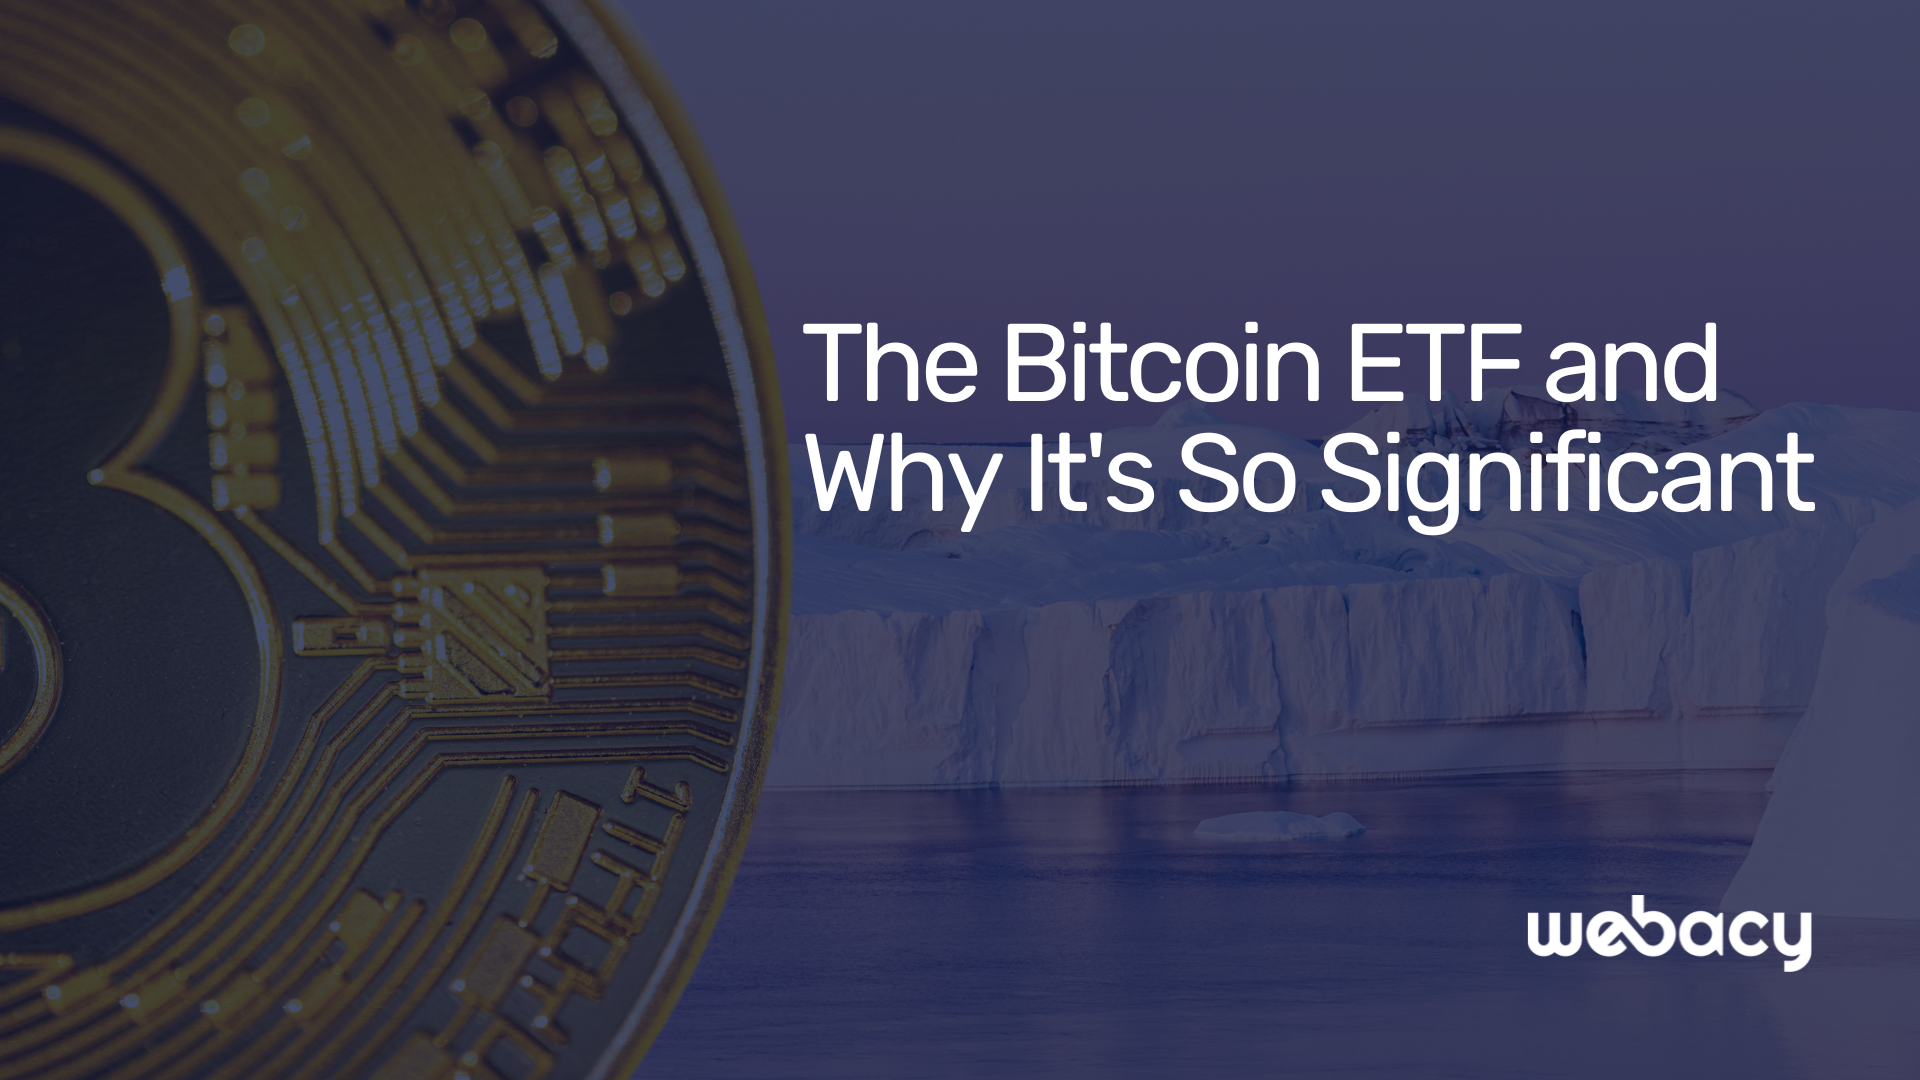 The Bitcoin ETF and Why It's So Significant